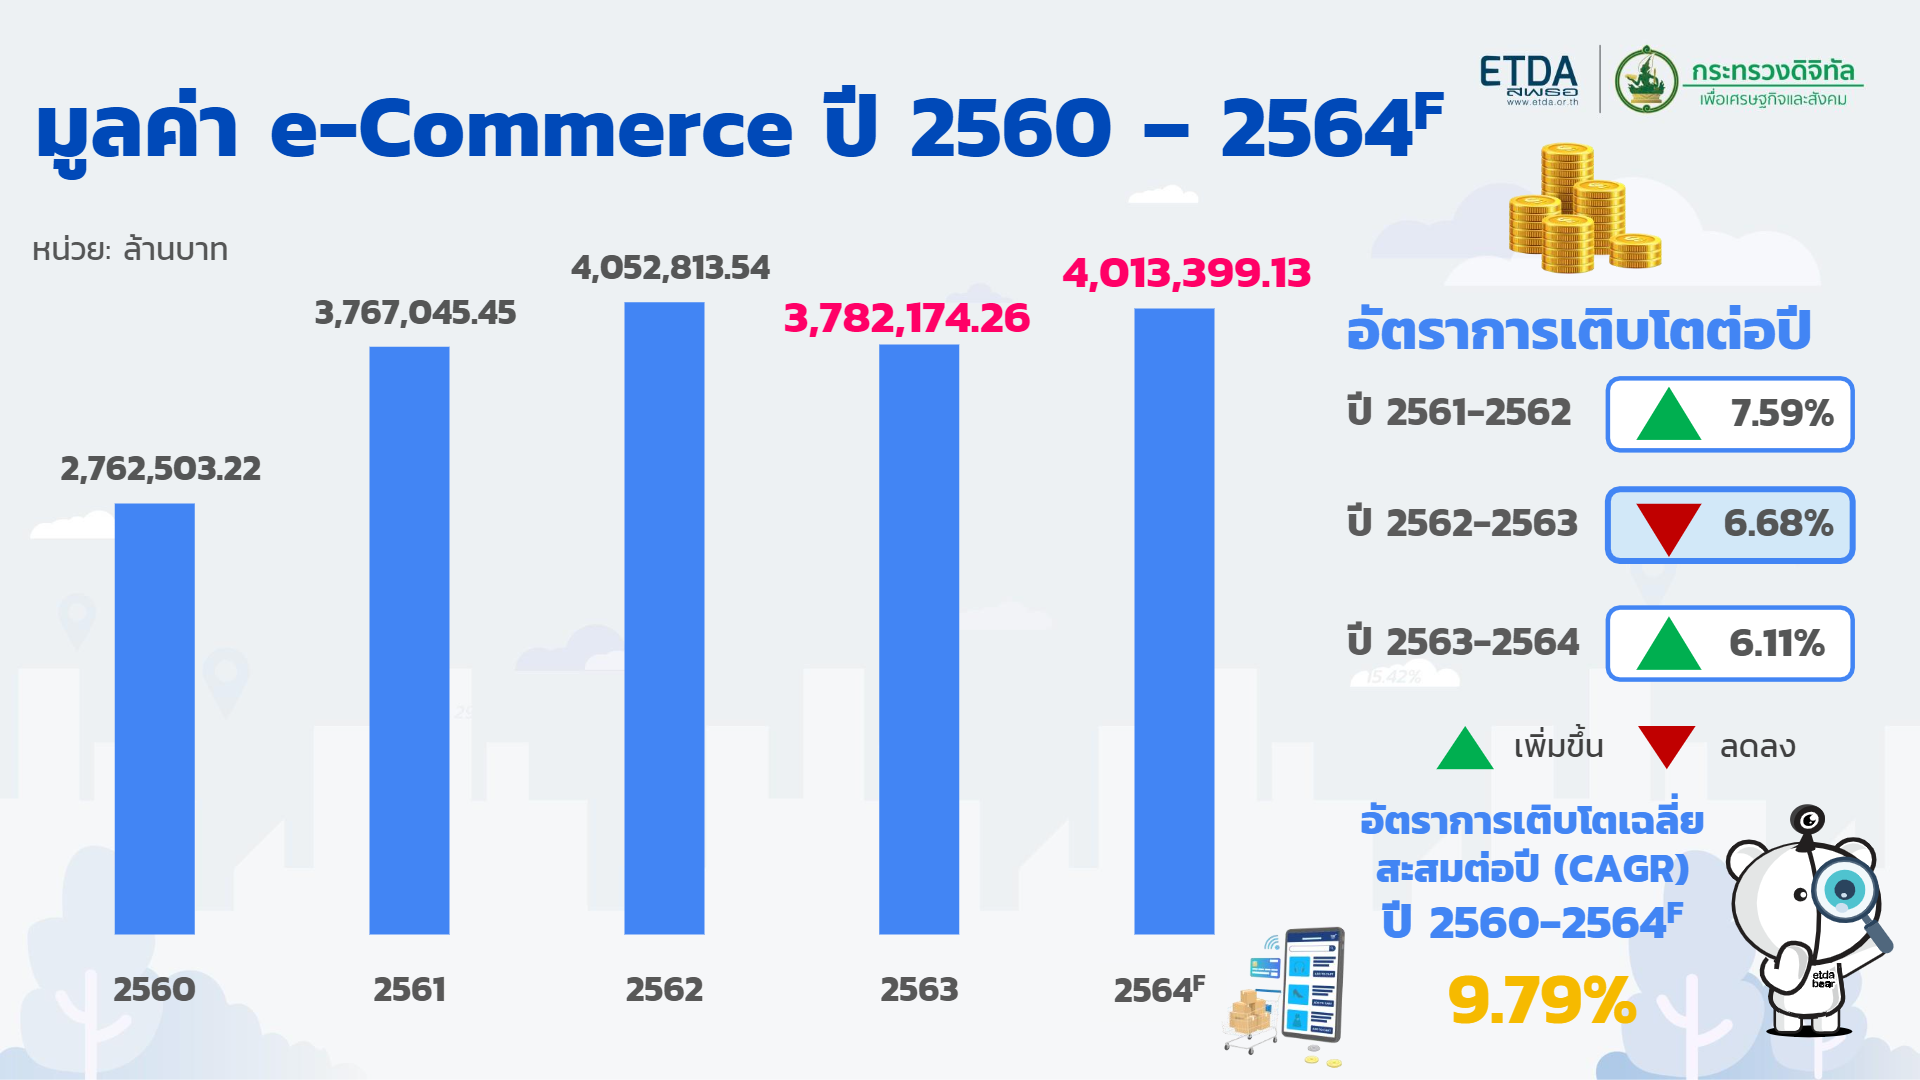 In 64, the value of e-commerce exceeded 4 trillion baht.